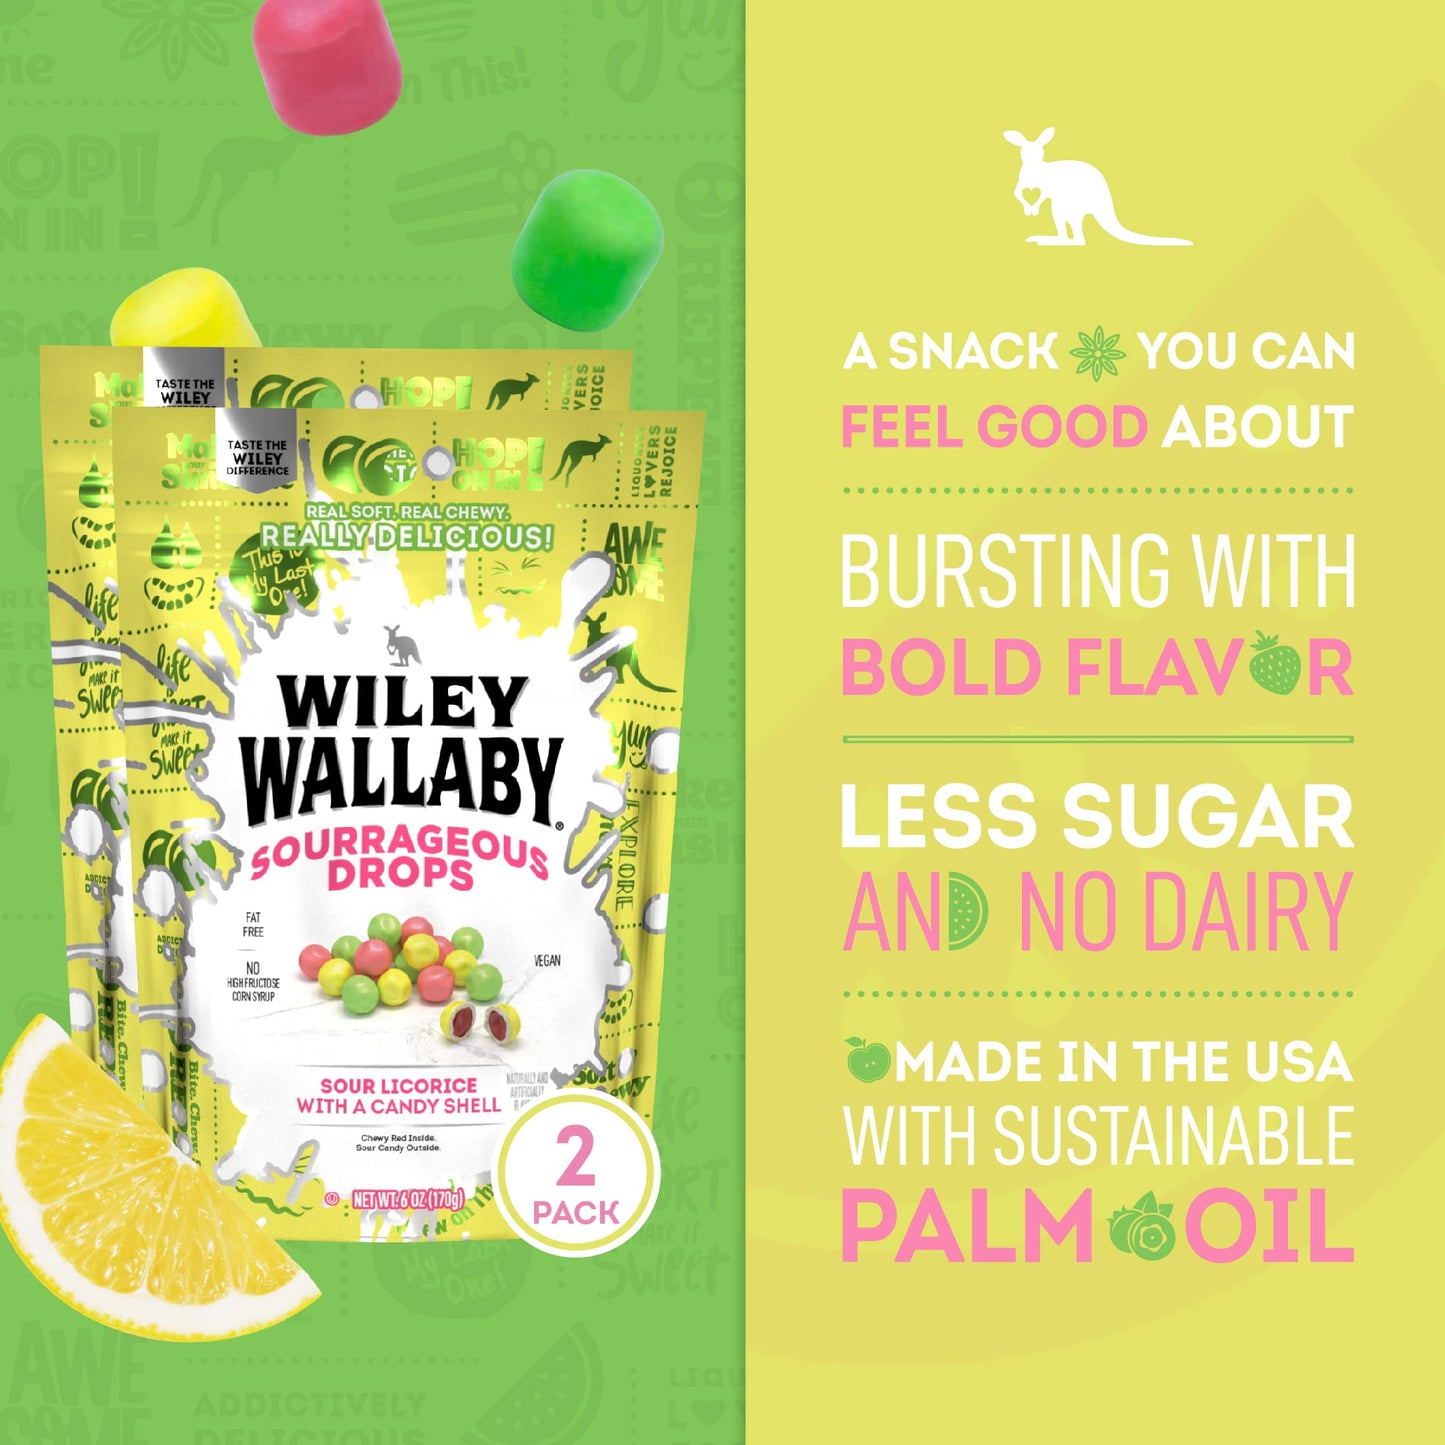 Wiley Wallaby Drops Original Fruits Gourmet Australian Style Soft & Chewy Licorice Candy_Parent in 1,2 & 3 packs